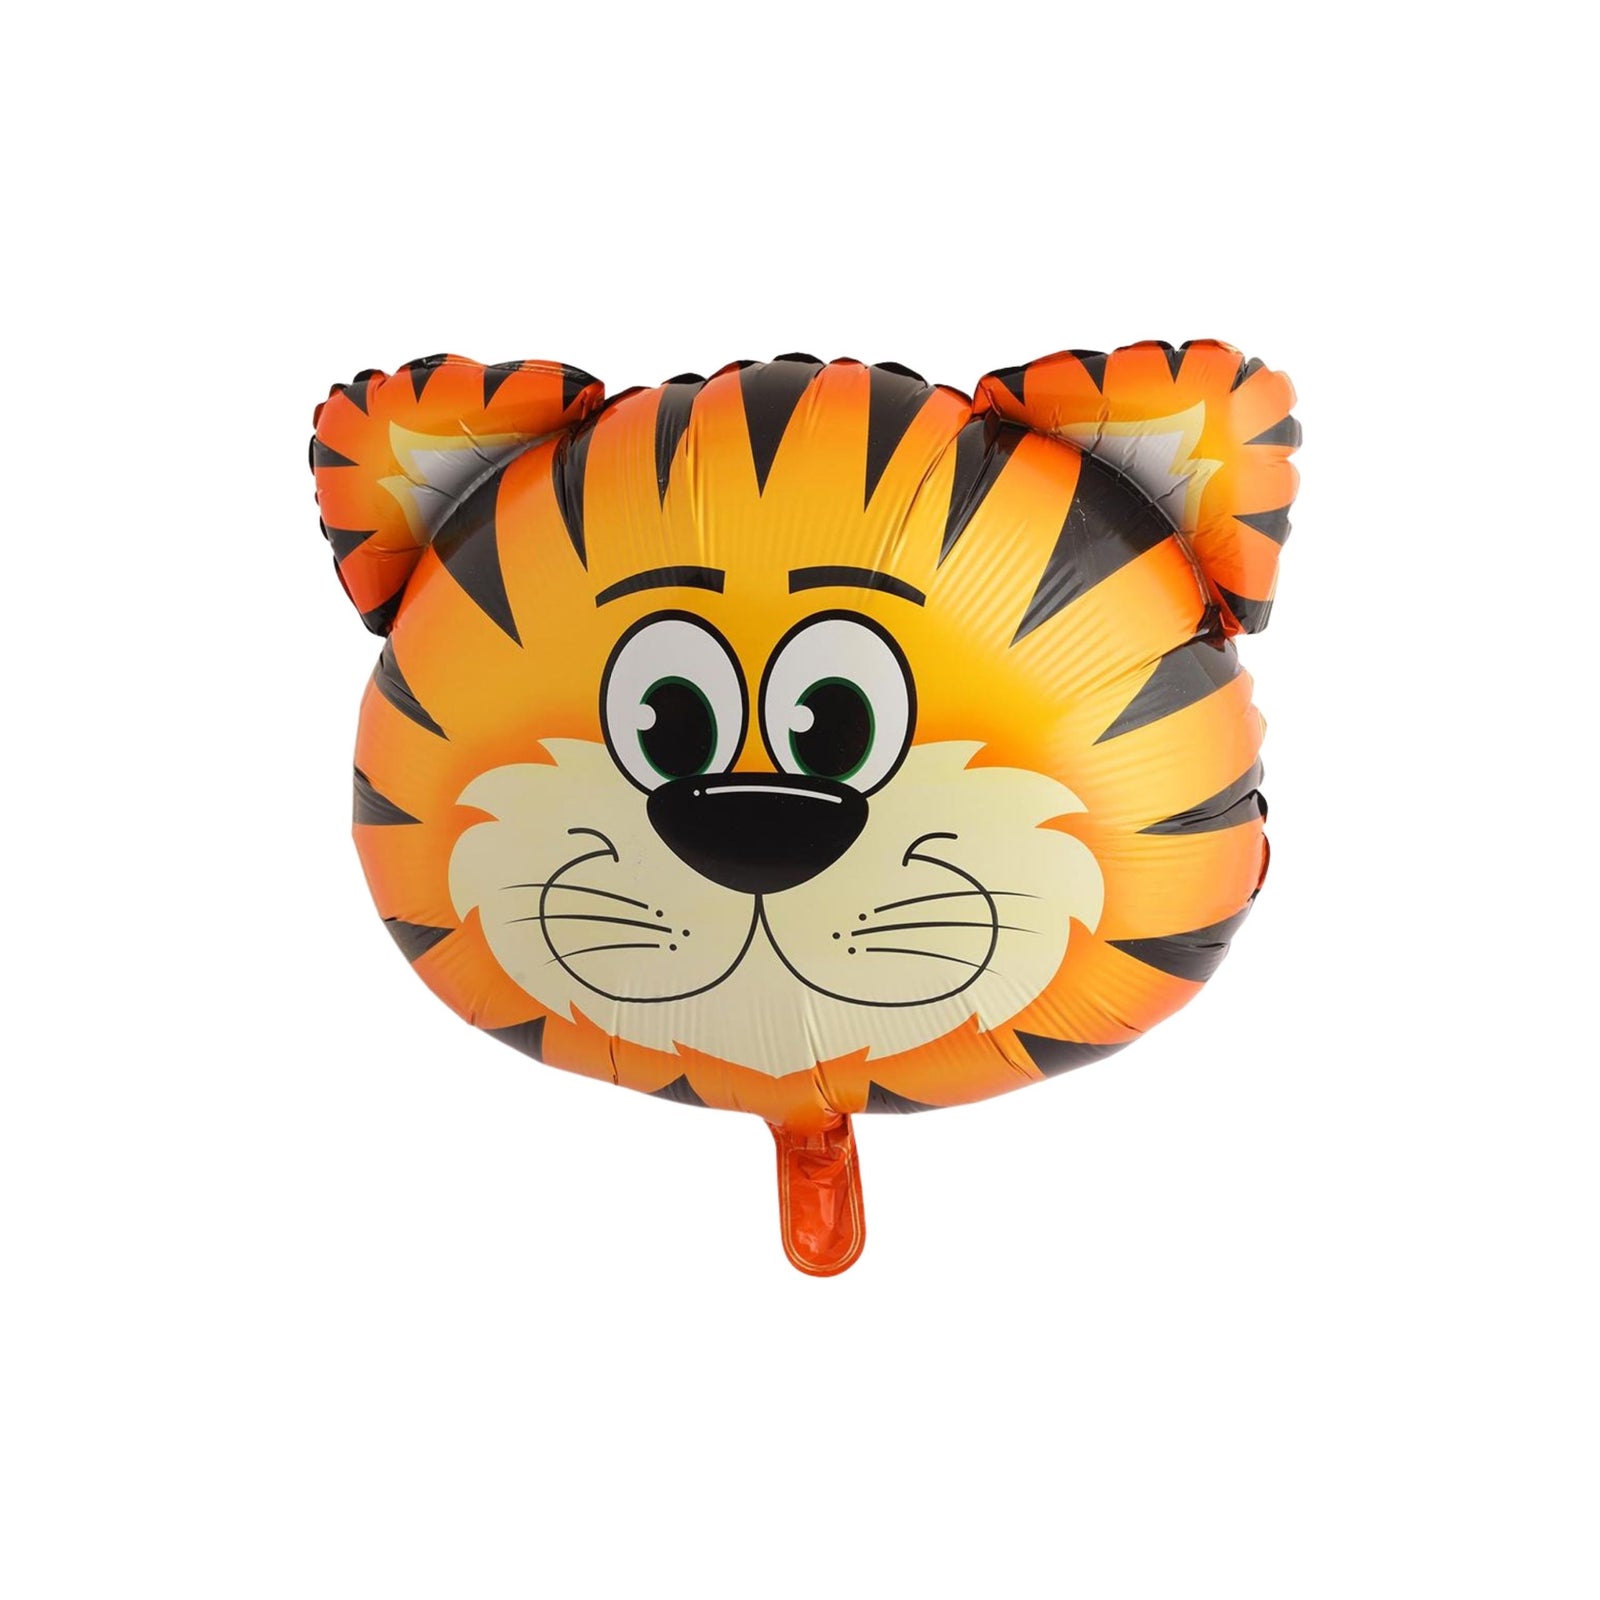 Animal Face Shaped Foil Balloon for Kids Birthday Party, Animal Theme, Zoo Party Decoration- Pack of 1 (Tiger)